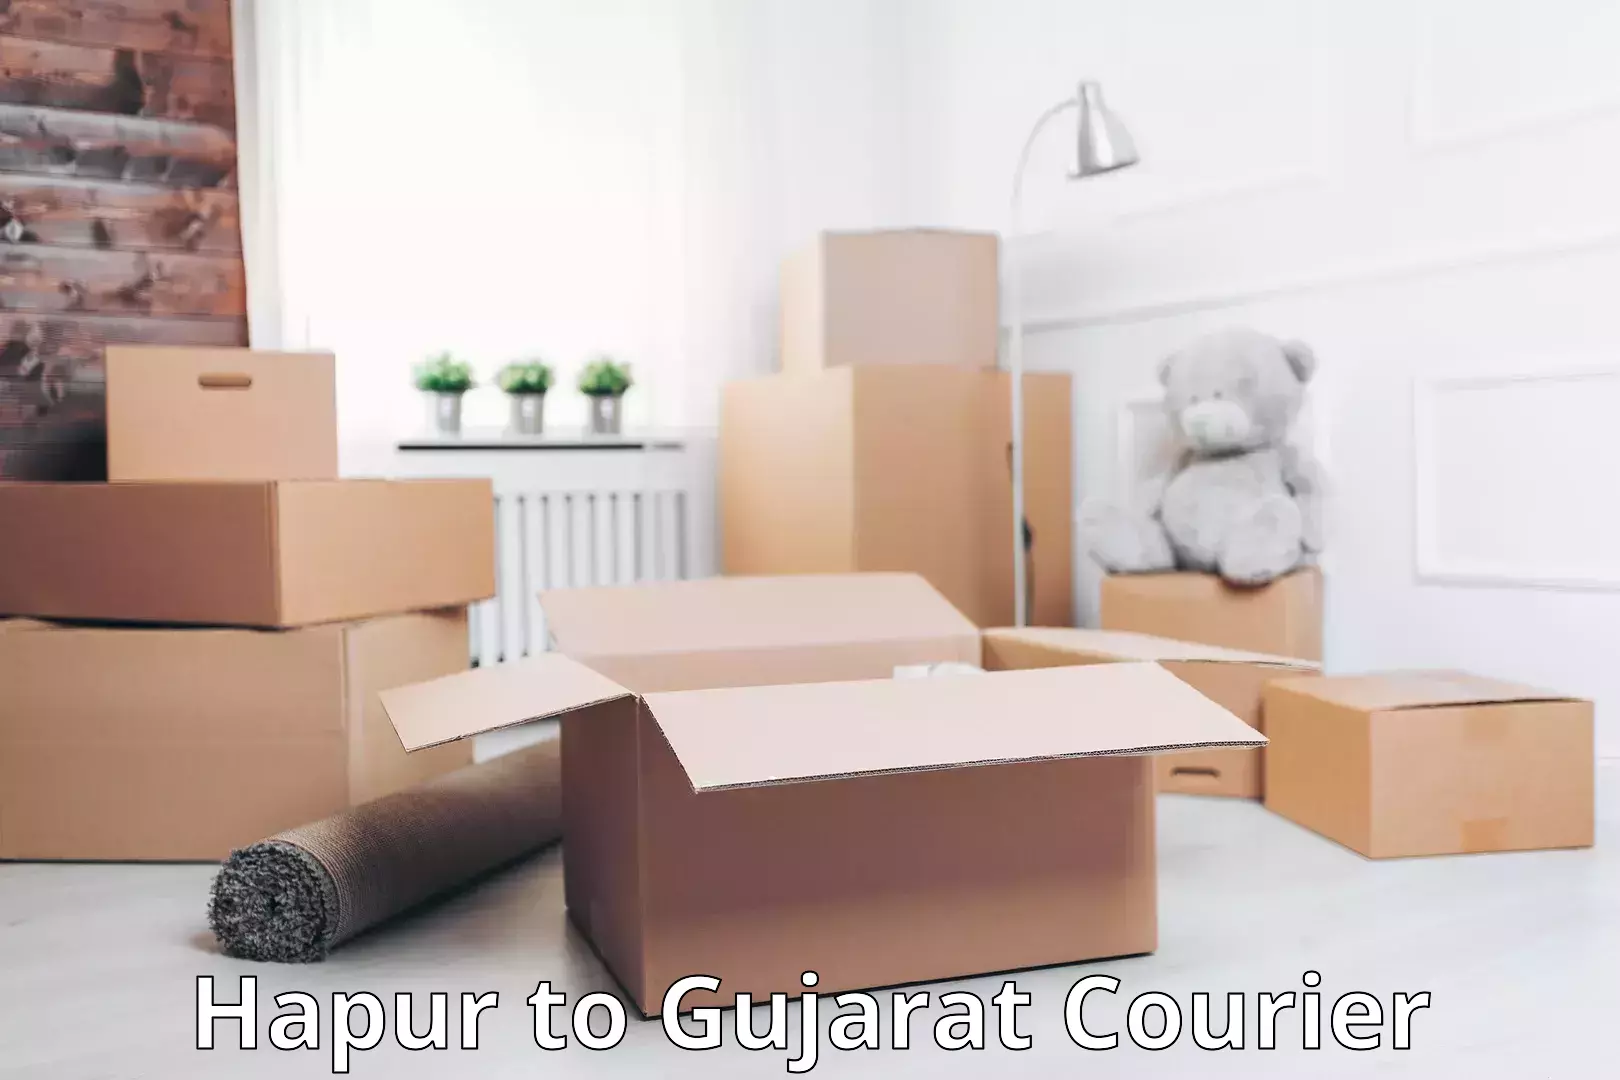 Luggage shipment specialists Hapur to Gujarat